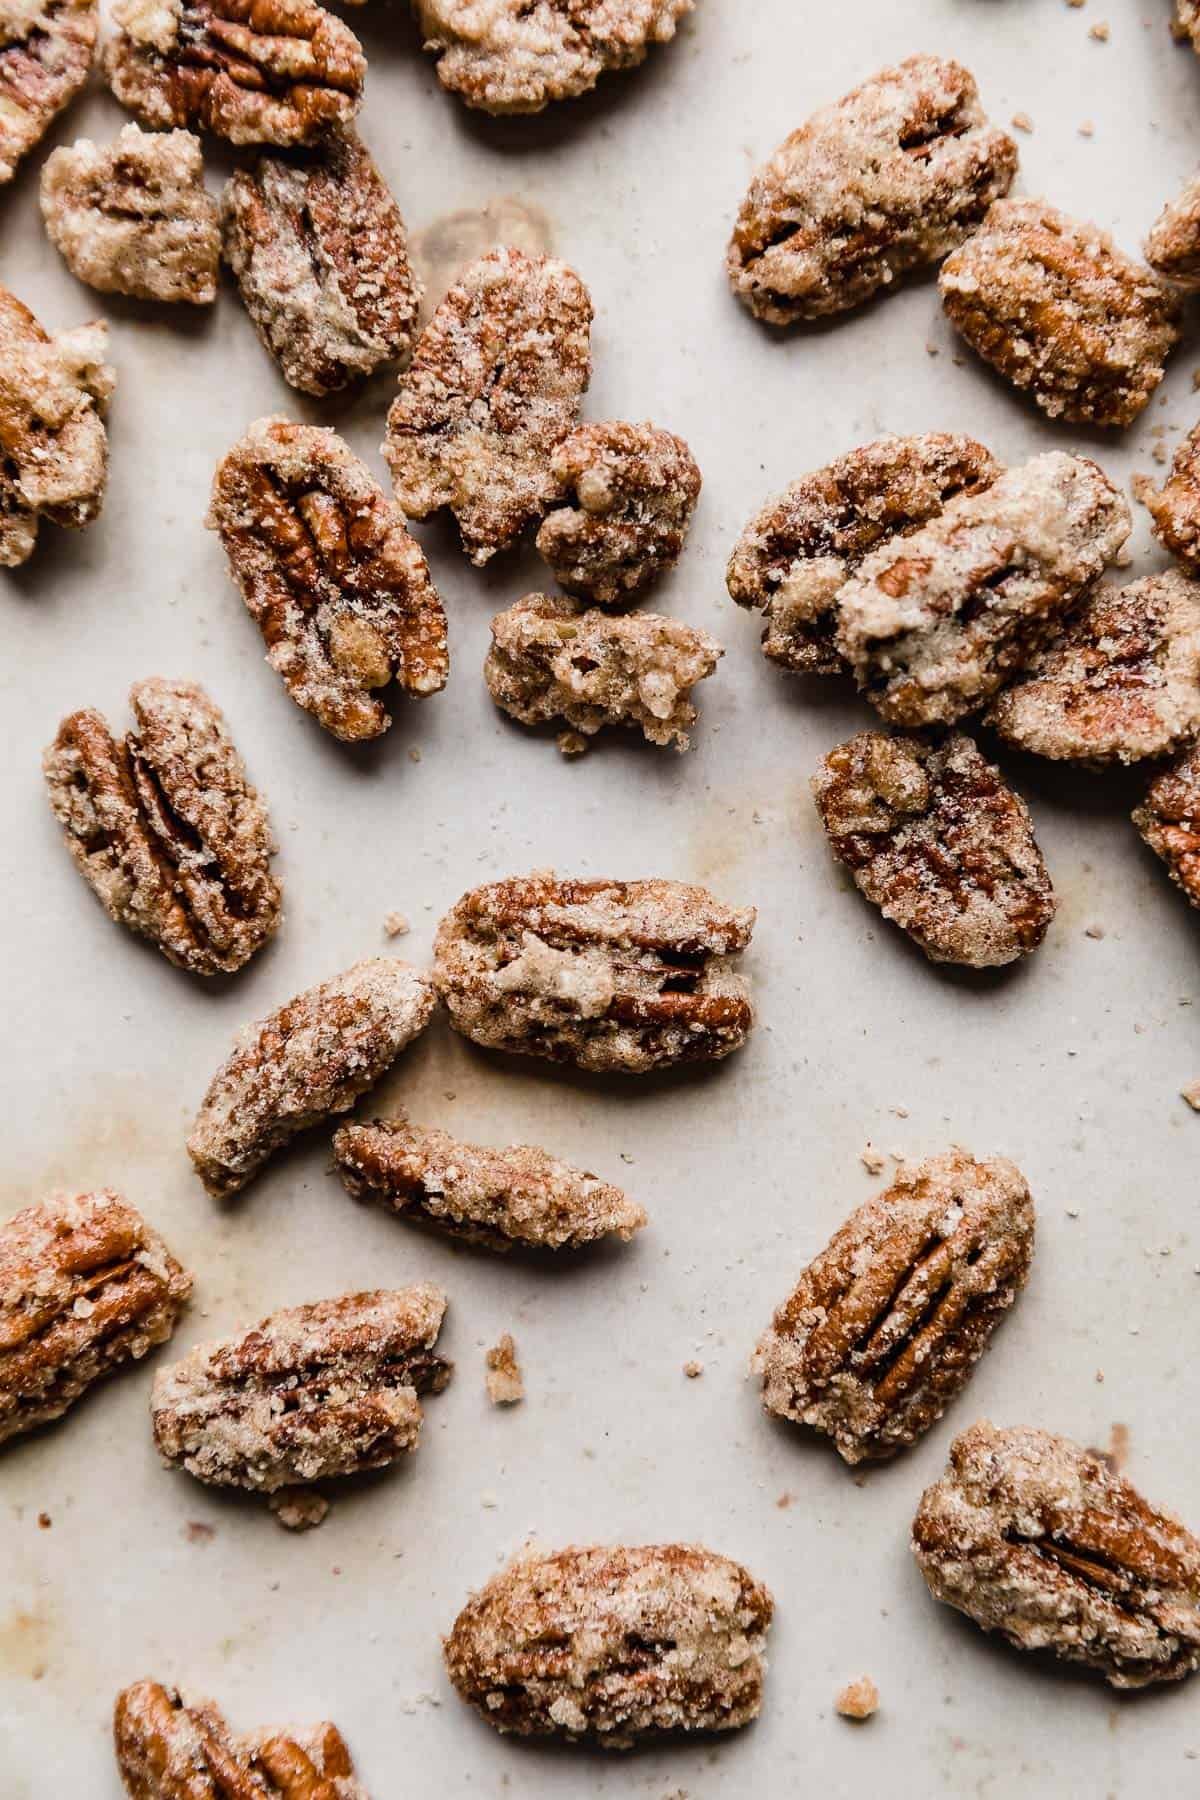 Roasted Candied Pecans on a tan background.